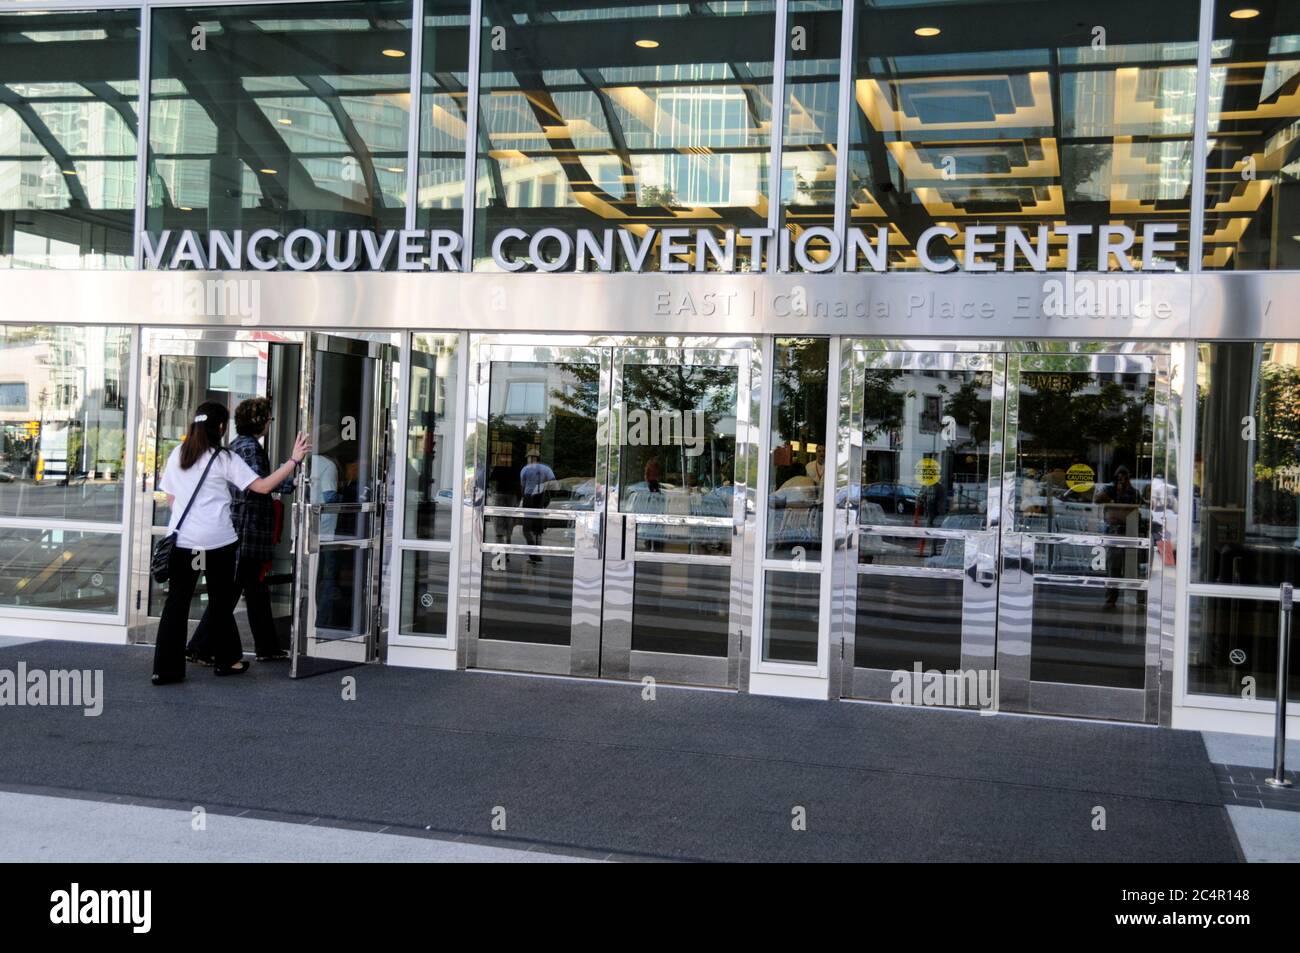 Vancouver Convention Centre in Vancouver, Canada Stock Photo